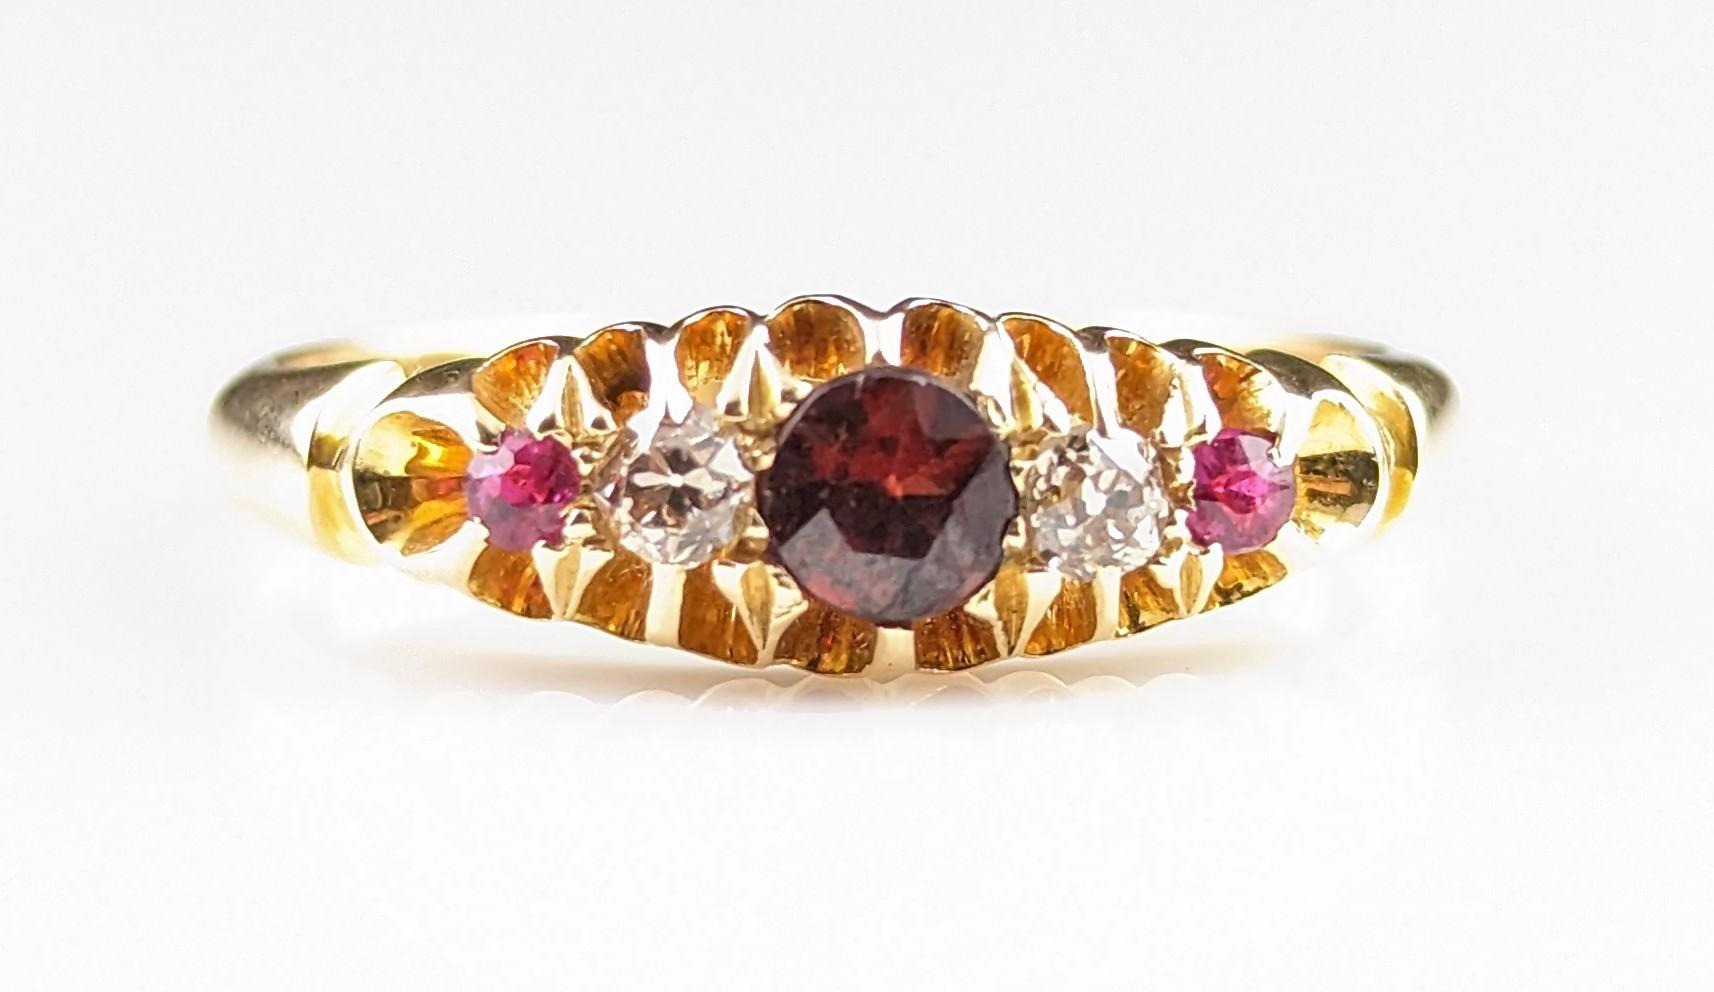 Antique Garnet, Ruby and Diamond Ring, 18ct Gold 7